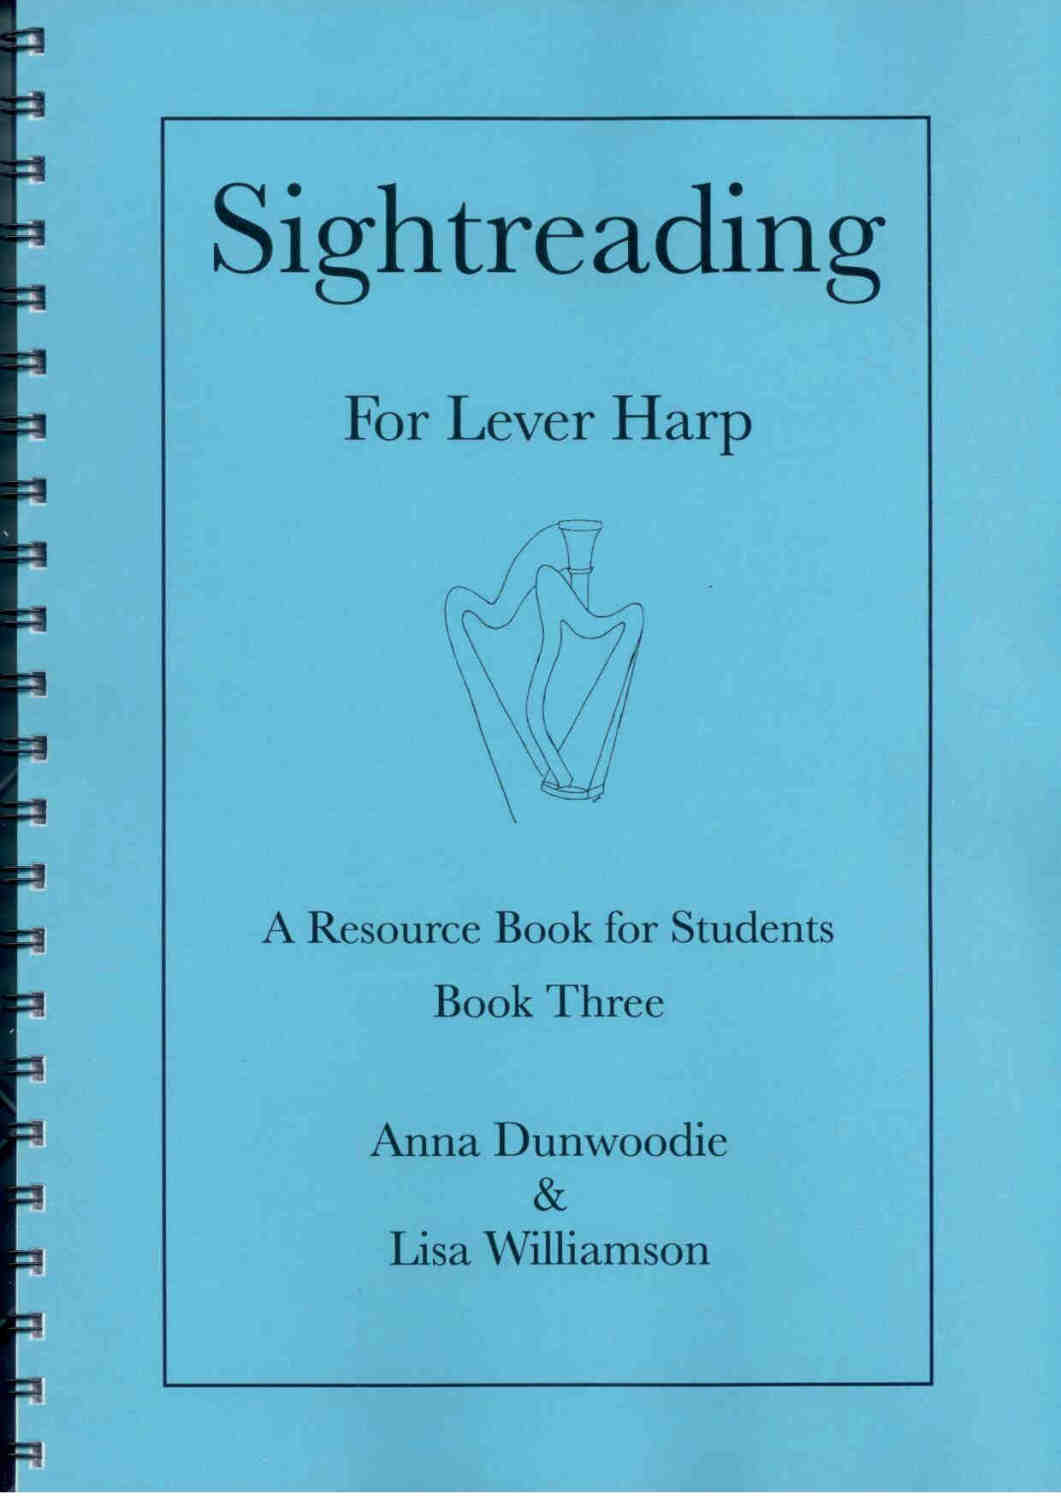 Sight-reading for Lever Harp: Book 3 - A. Dunwoodie, L. Williamson